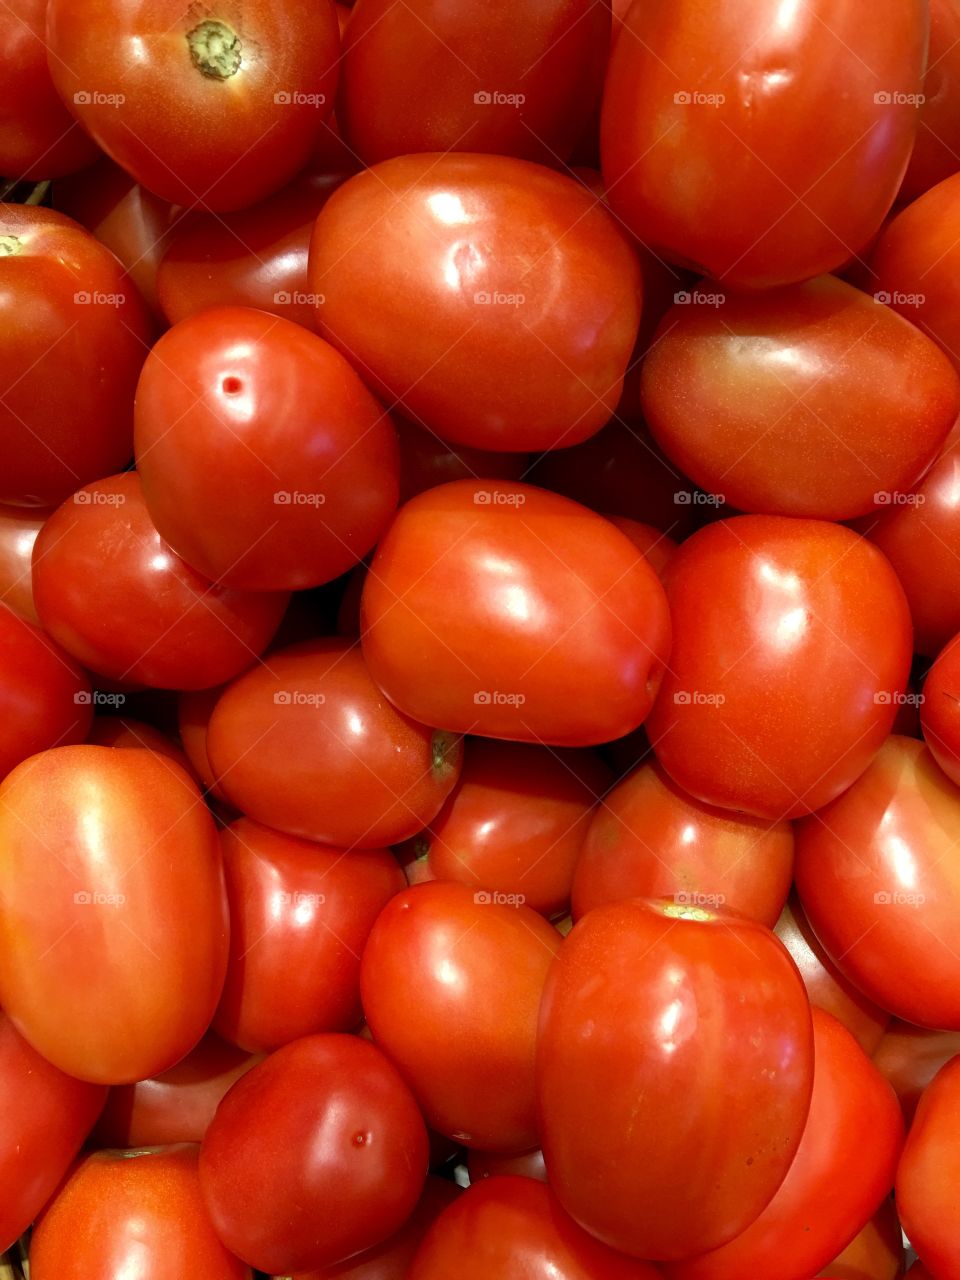 Plum Tomatoes In A Box, Lots Of Them